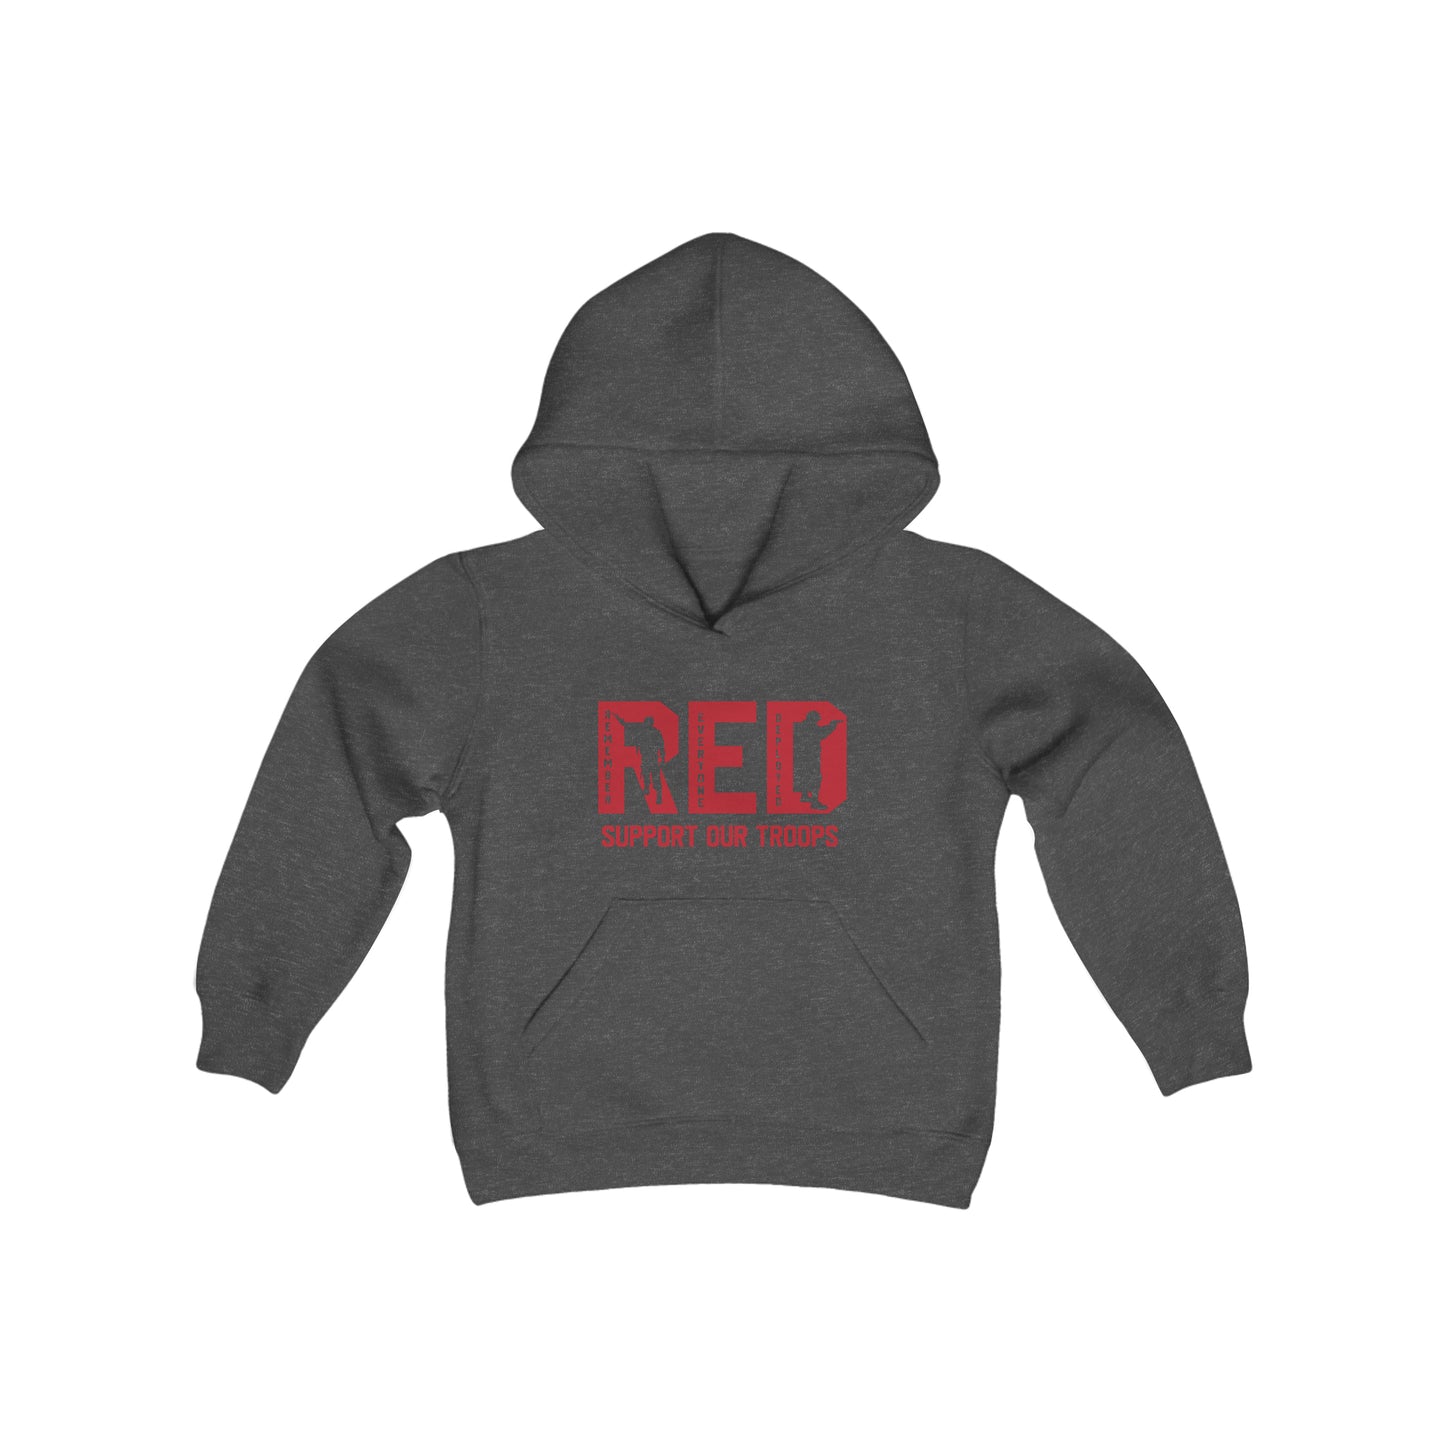 Rakkgear Youth "Remember Everyone Deployed" Dark Grey Hoodie: Grey hoodie with RED letters and 'Support Our Troops' on the front. Iconic Rakkgear Logo on the upper back